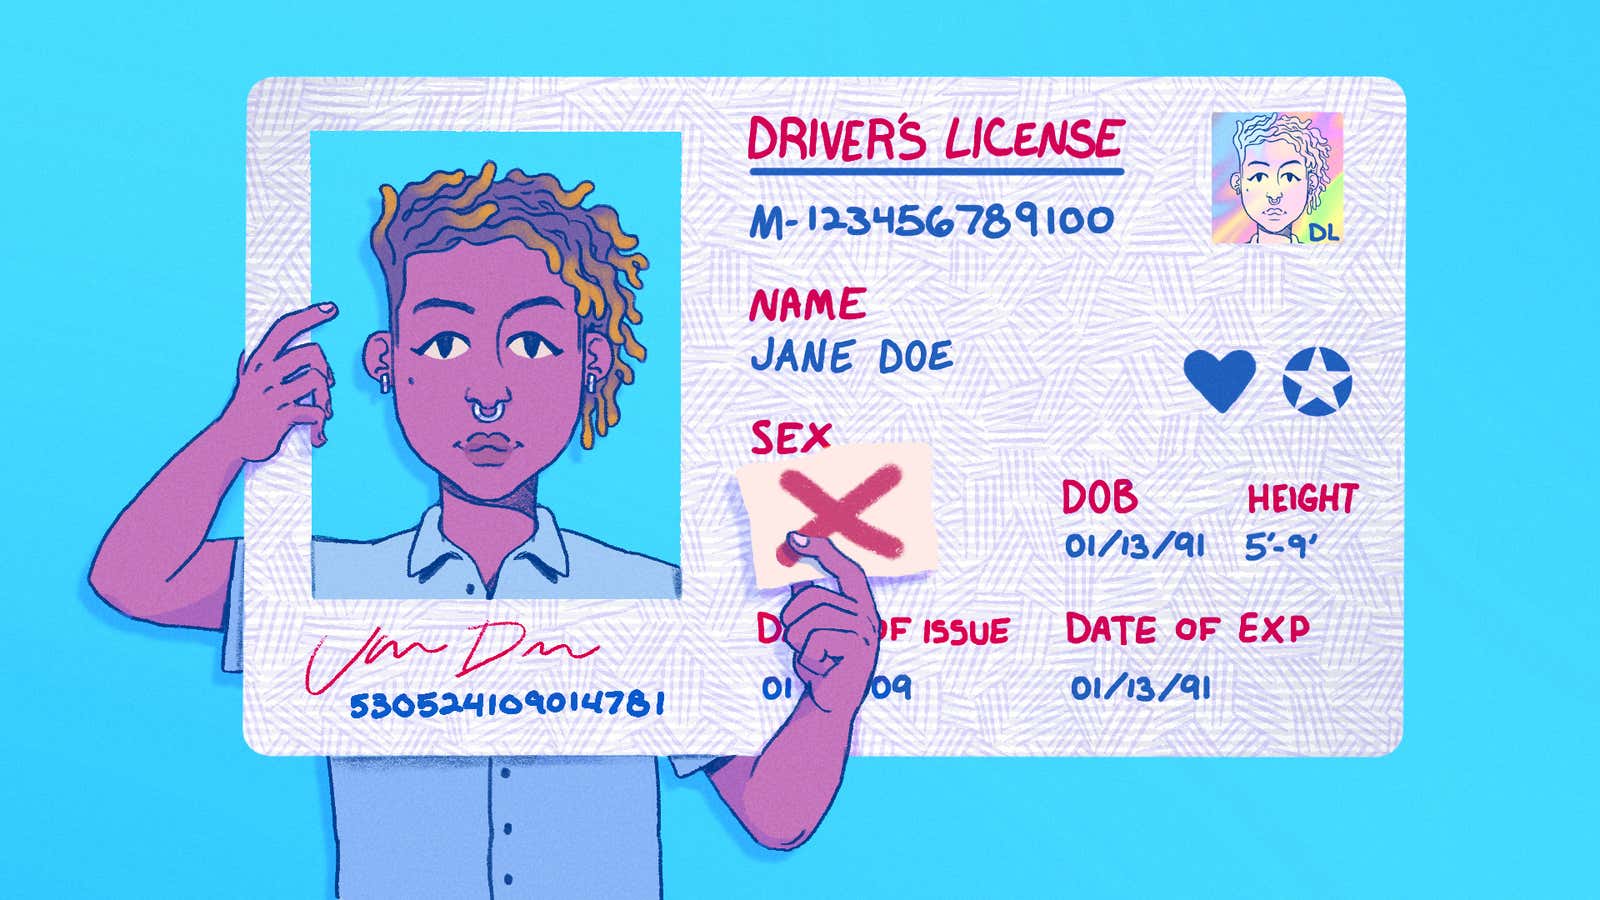 How To Change The Gender On Your Drivers License